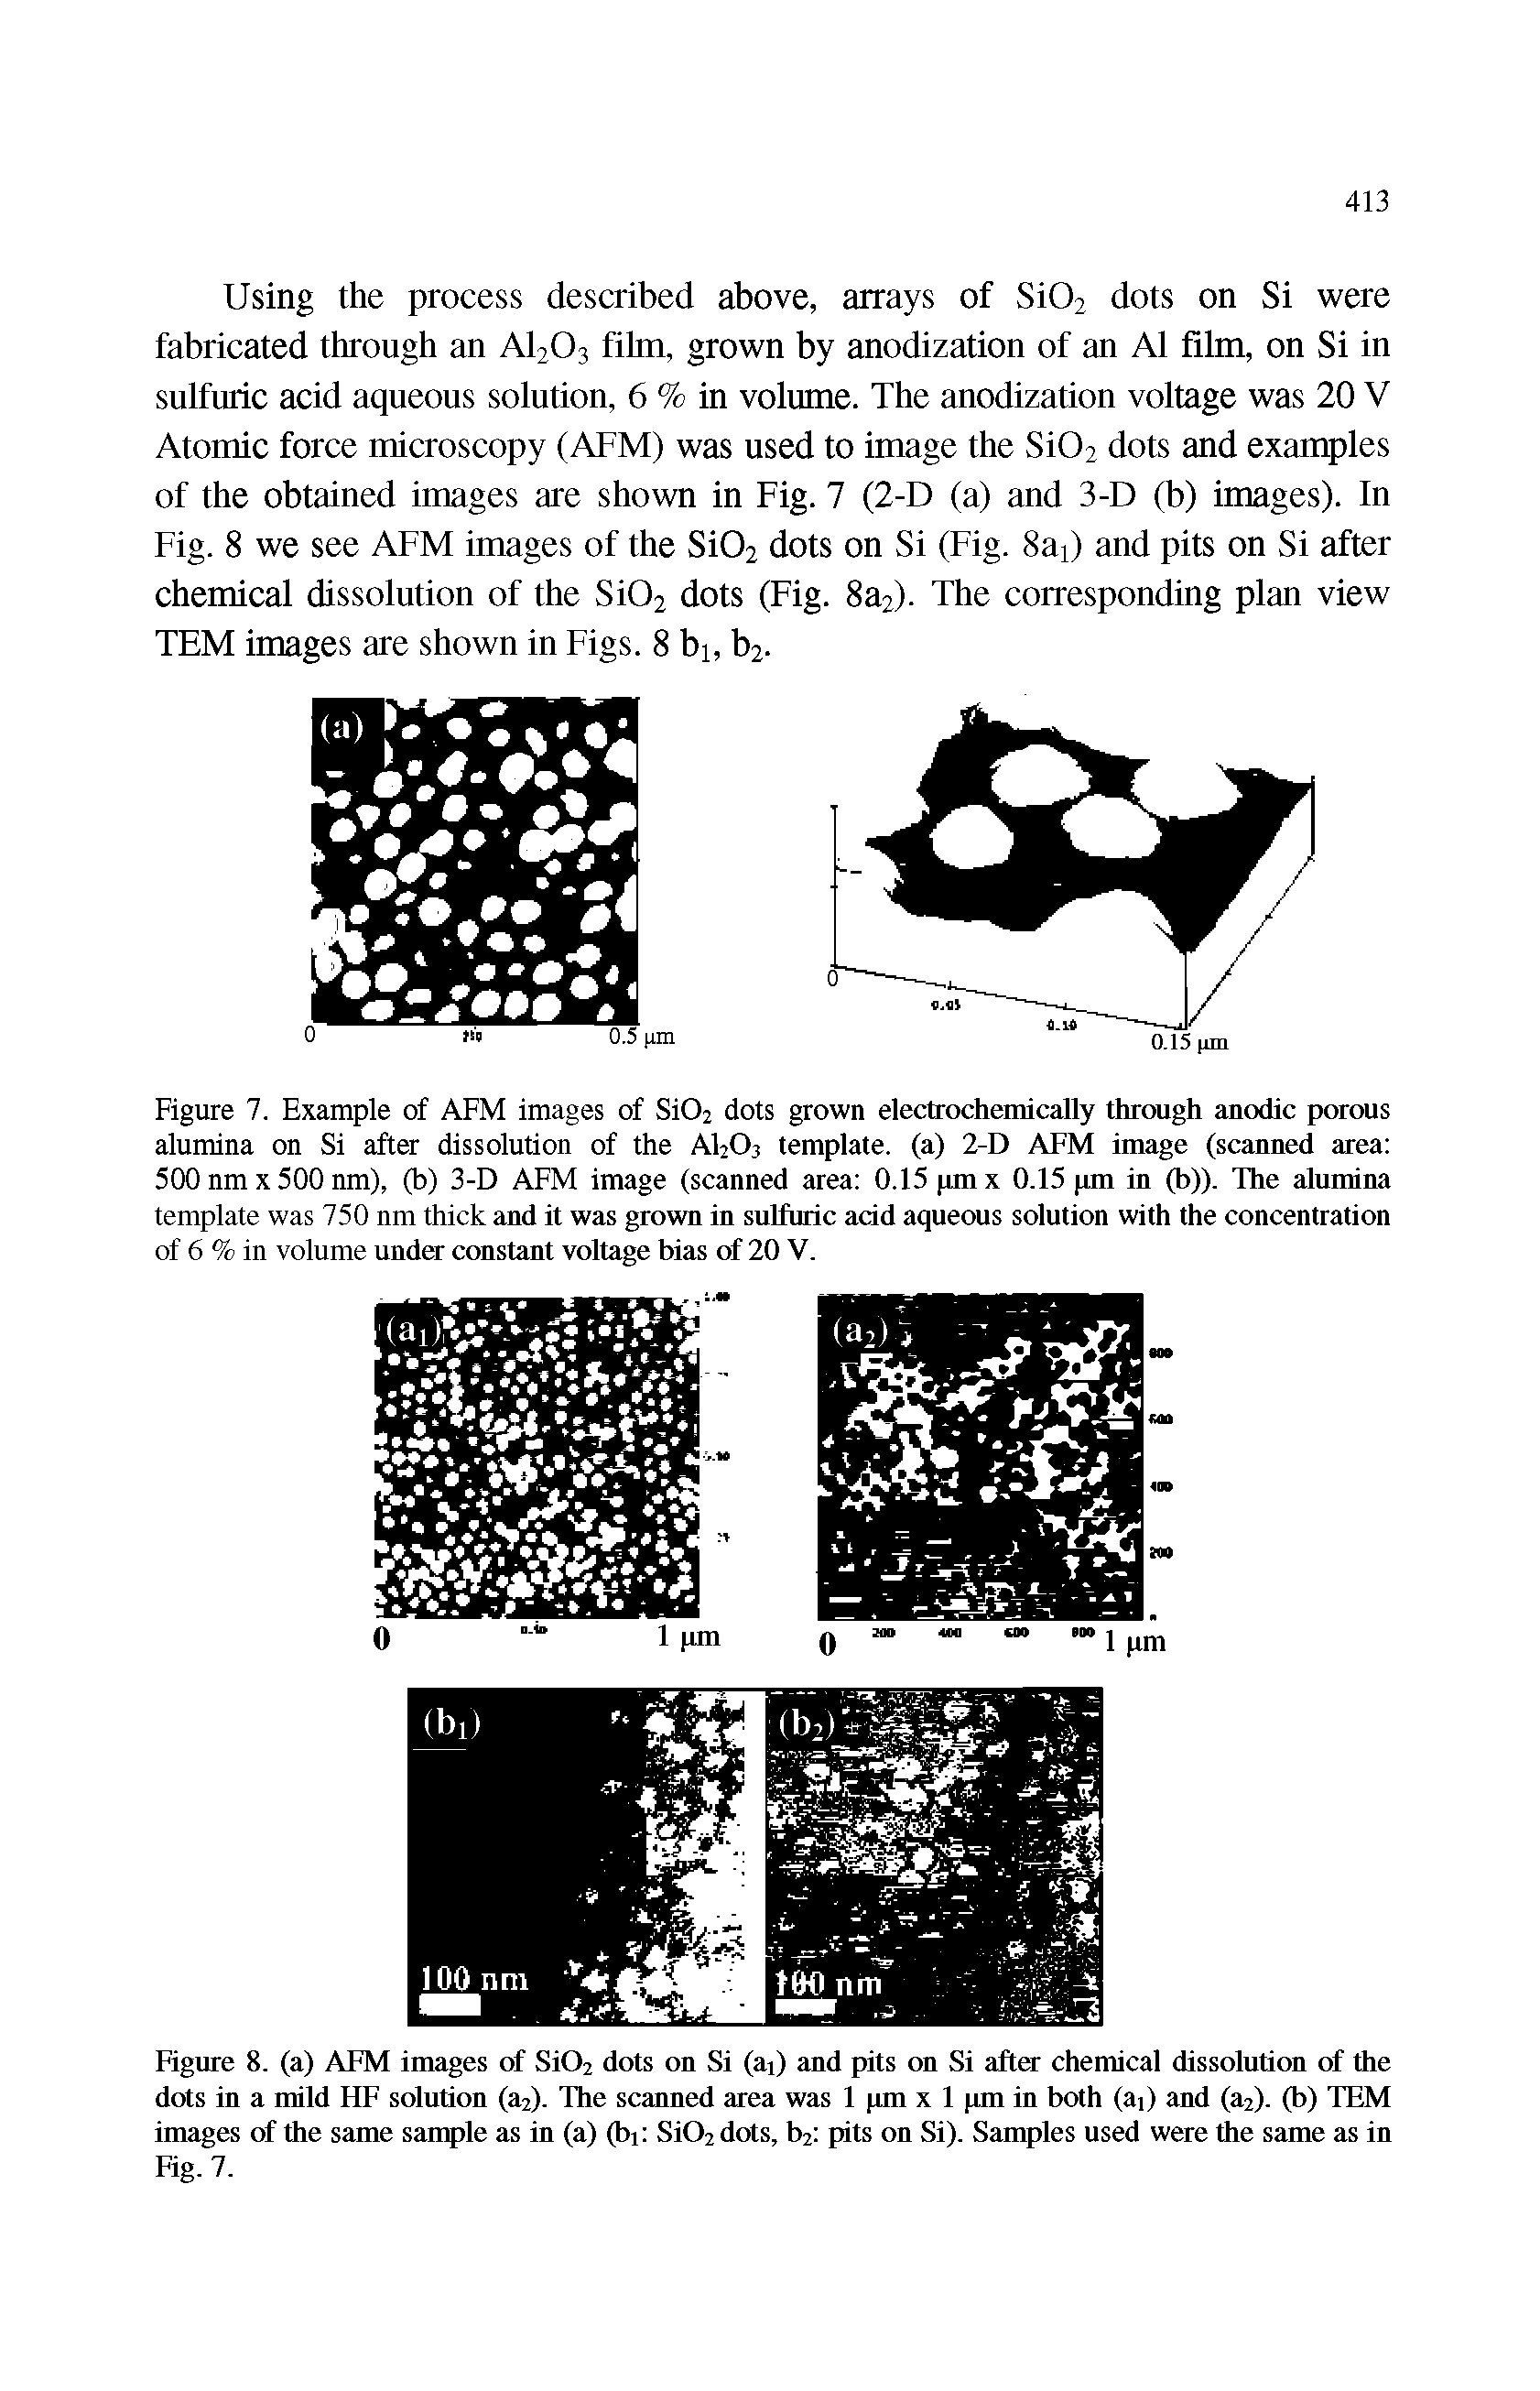 Figure 7. Example of AFM images of SiO2 dots grown electrochemically through anodic porous alumina on Si after dissolution of the A12O3 template, (a) 2-D AFM image (scanned area 500 nm x 500 nm), (b) 3-D AFM image (scanned area 0.15 pmx 0.15 pm in (b)). The alumina template was 750 nm thick and it was grown in sulfuric add aqueous solution with the concentration of 6 % in volume under constant voltage bias of 20 V.